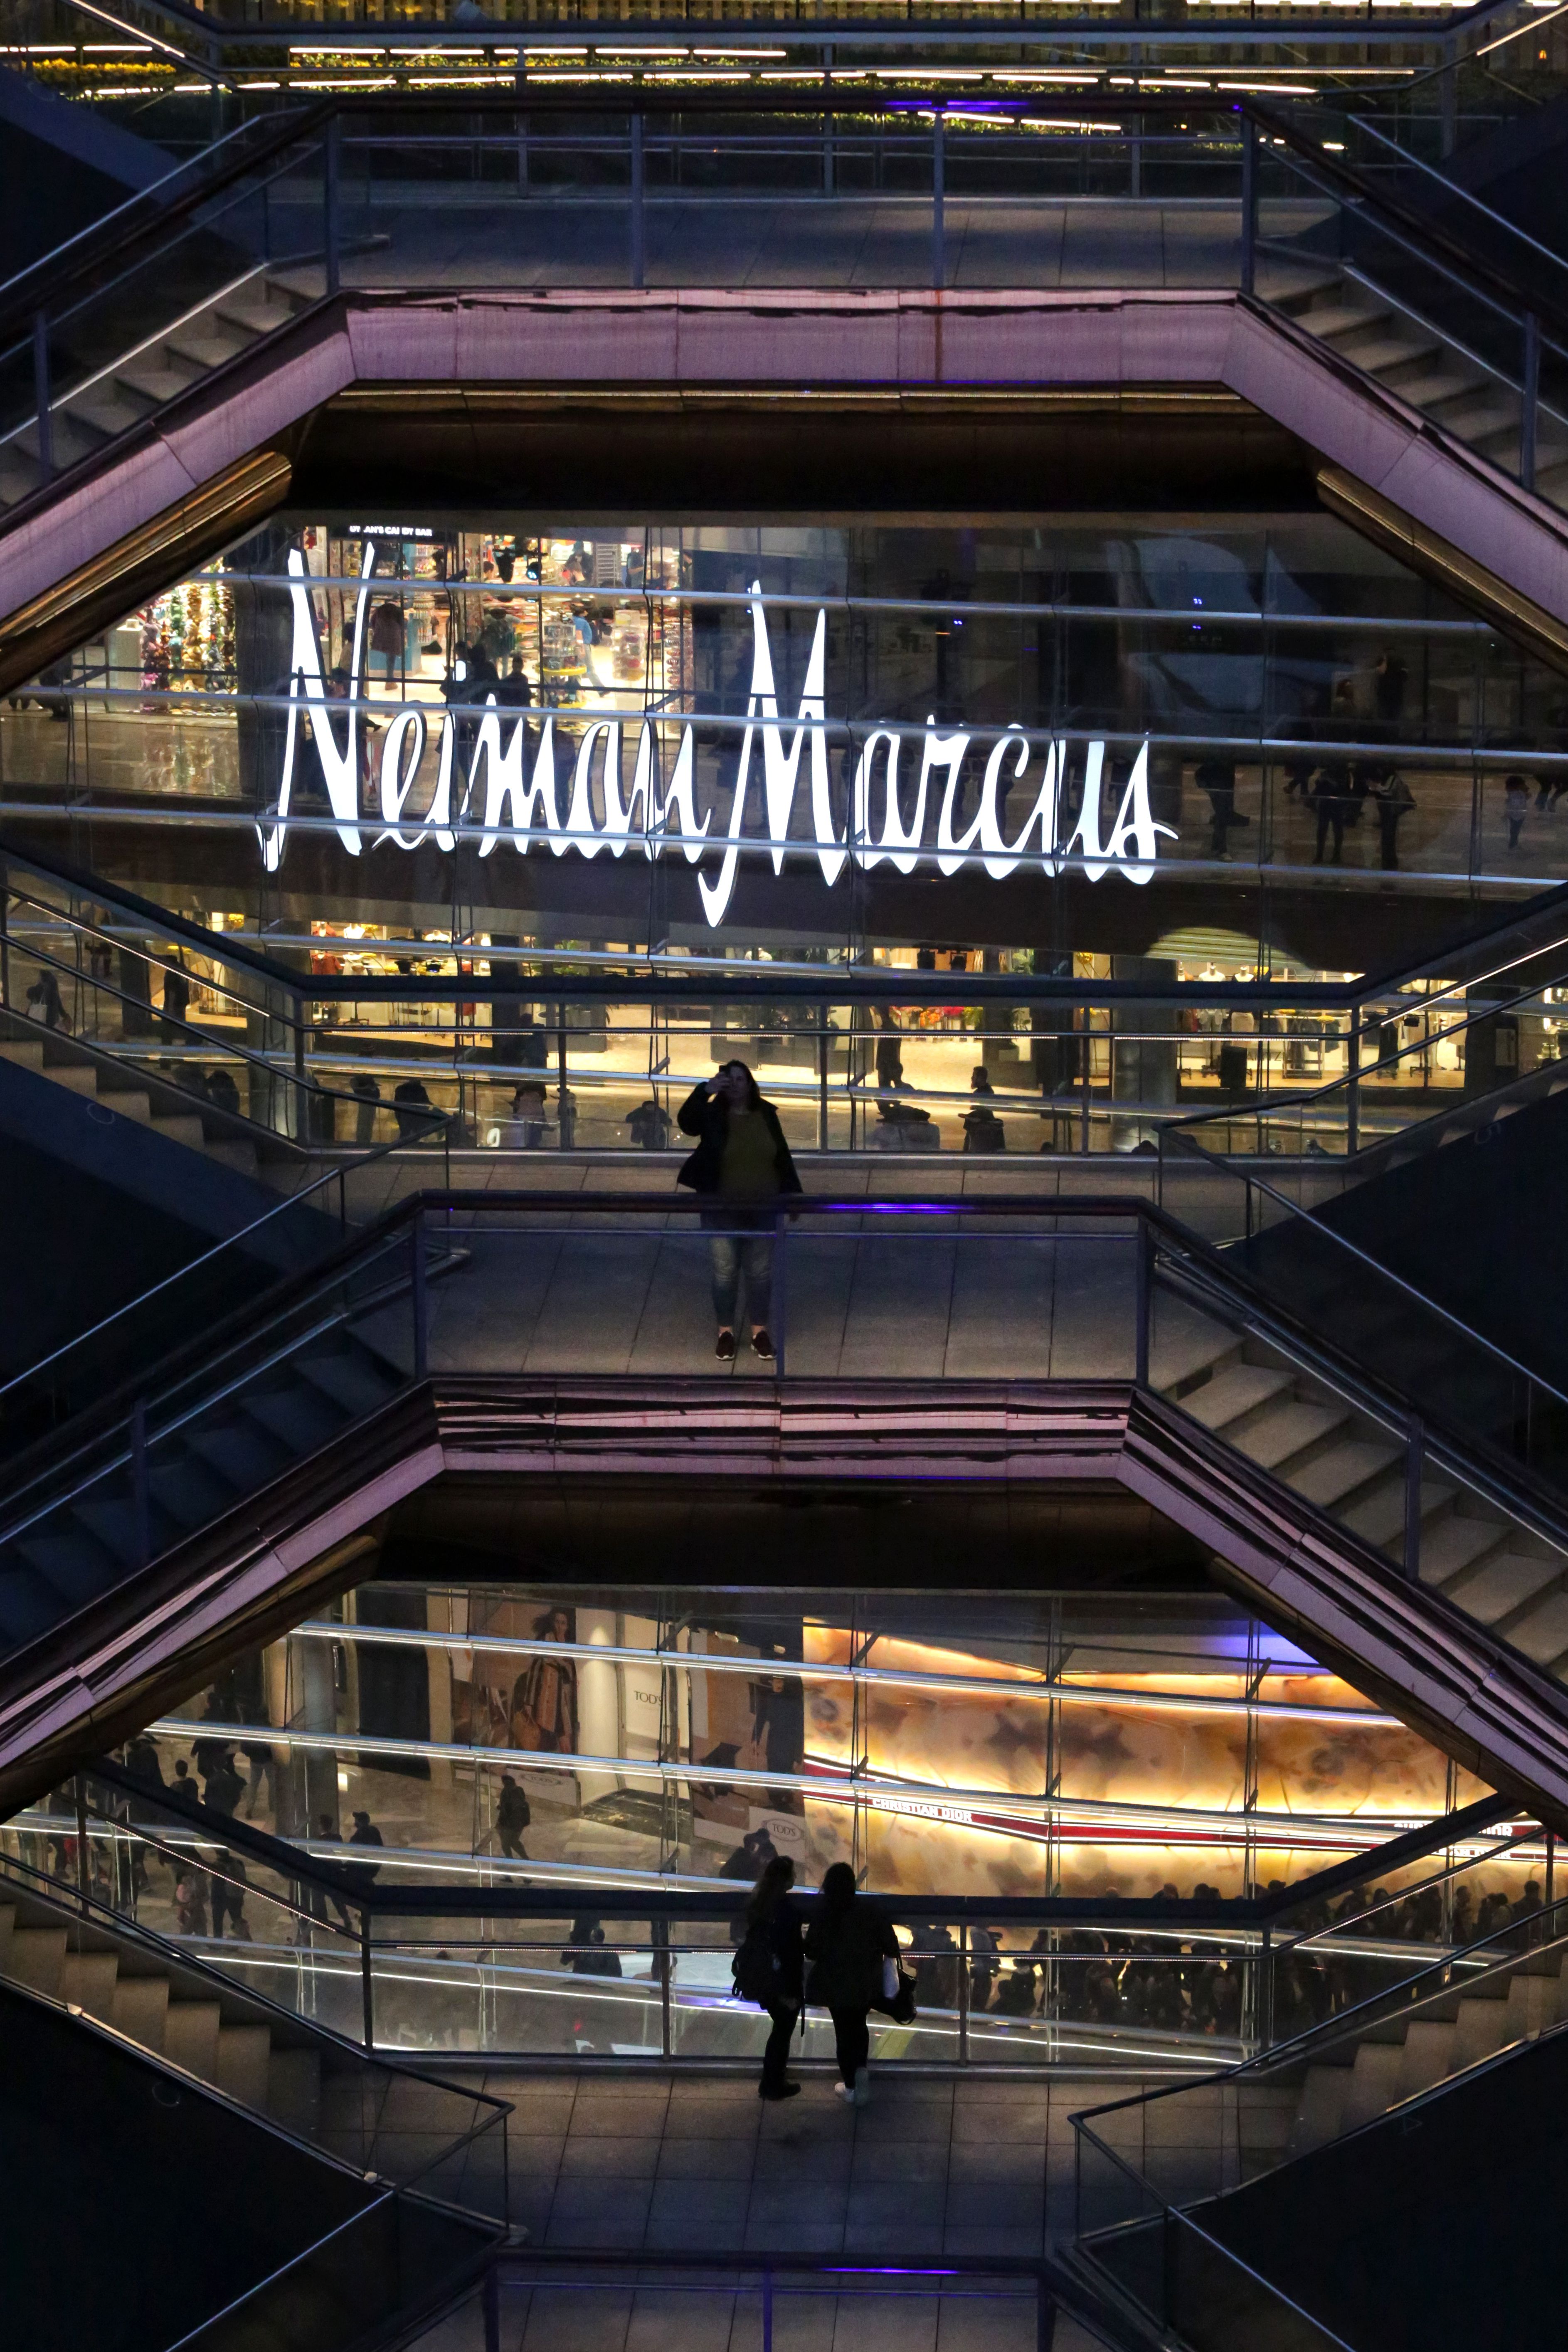 Neiman Marcus to Close Hudson Yards Store — It Opened 16 Months Ago –  Footwear News